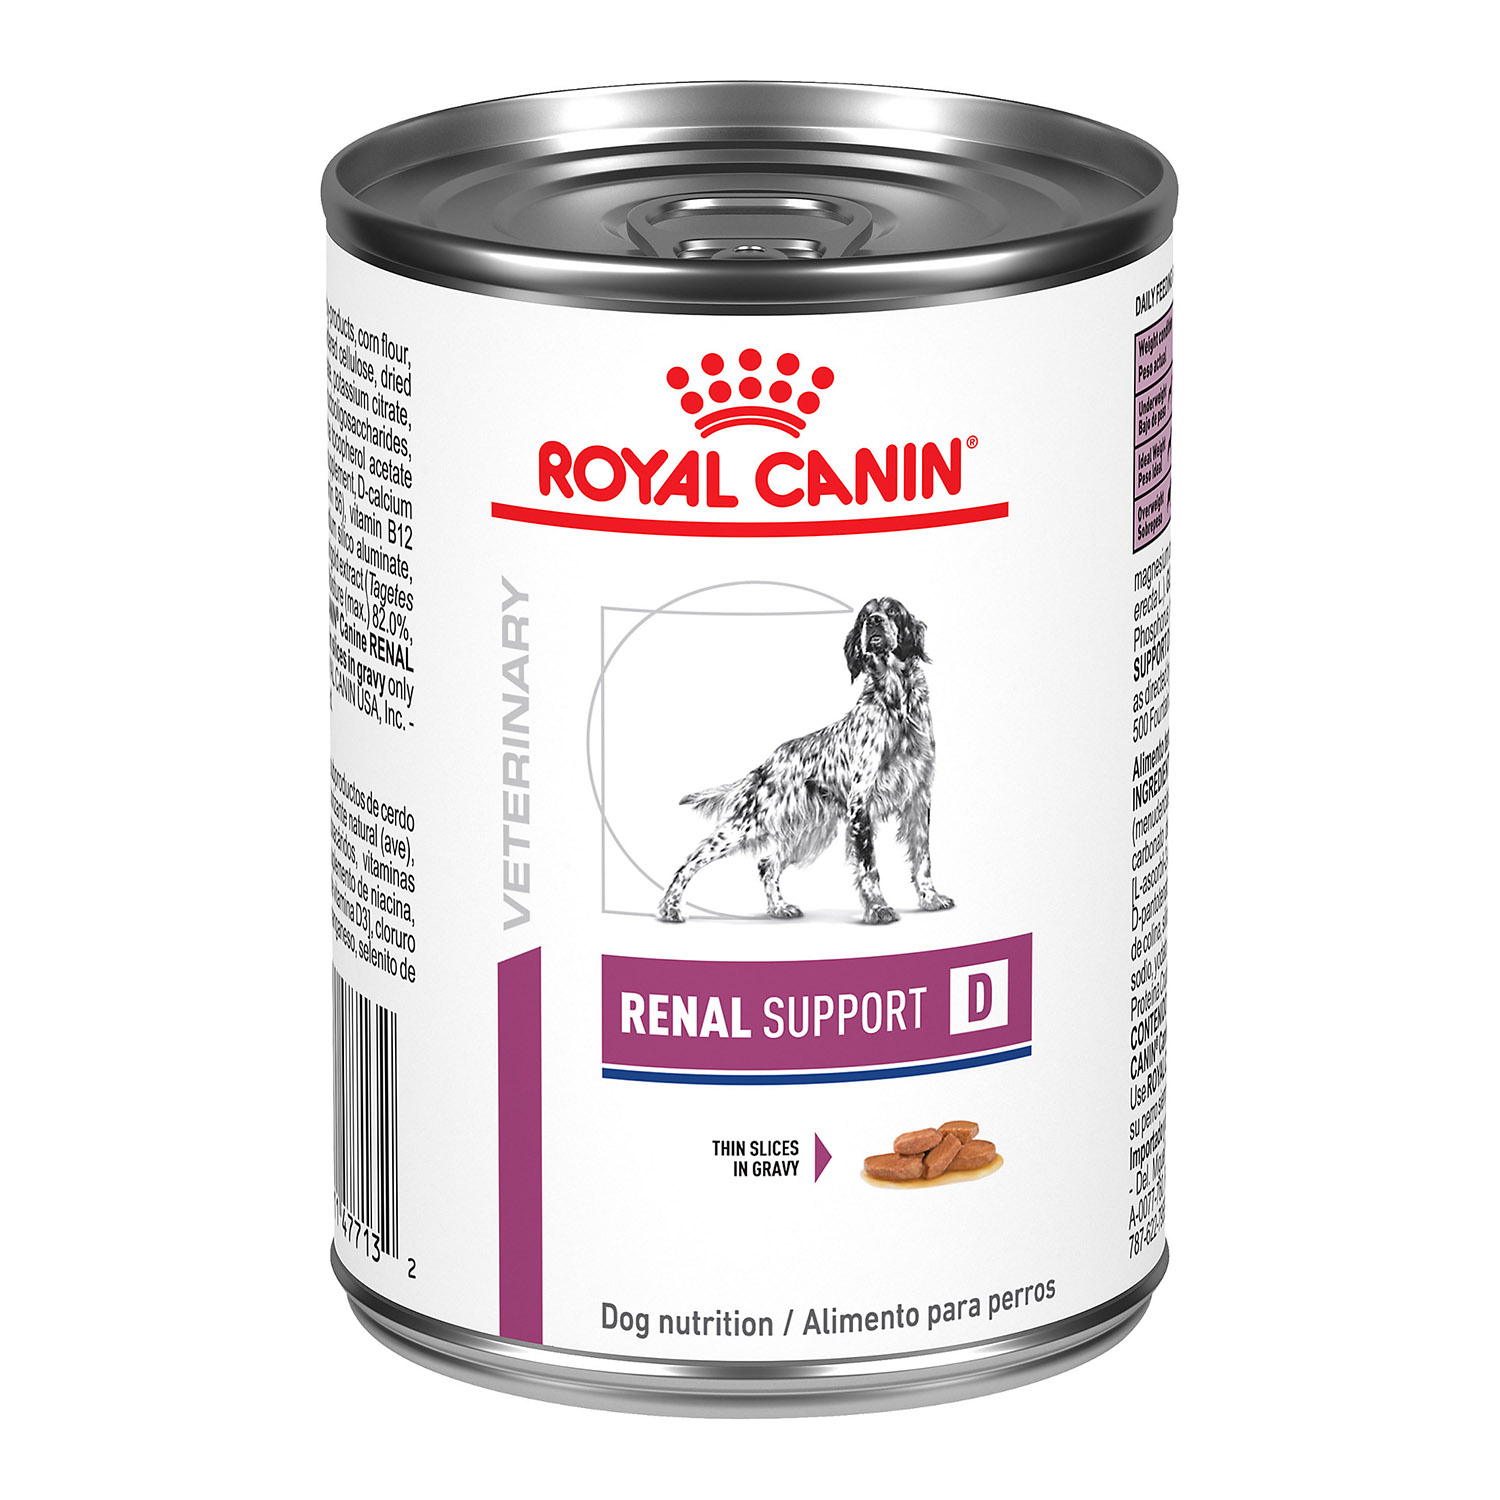 Royal Canin Veterinary Renal Support D Thin Slices in Gravy Canned Dog